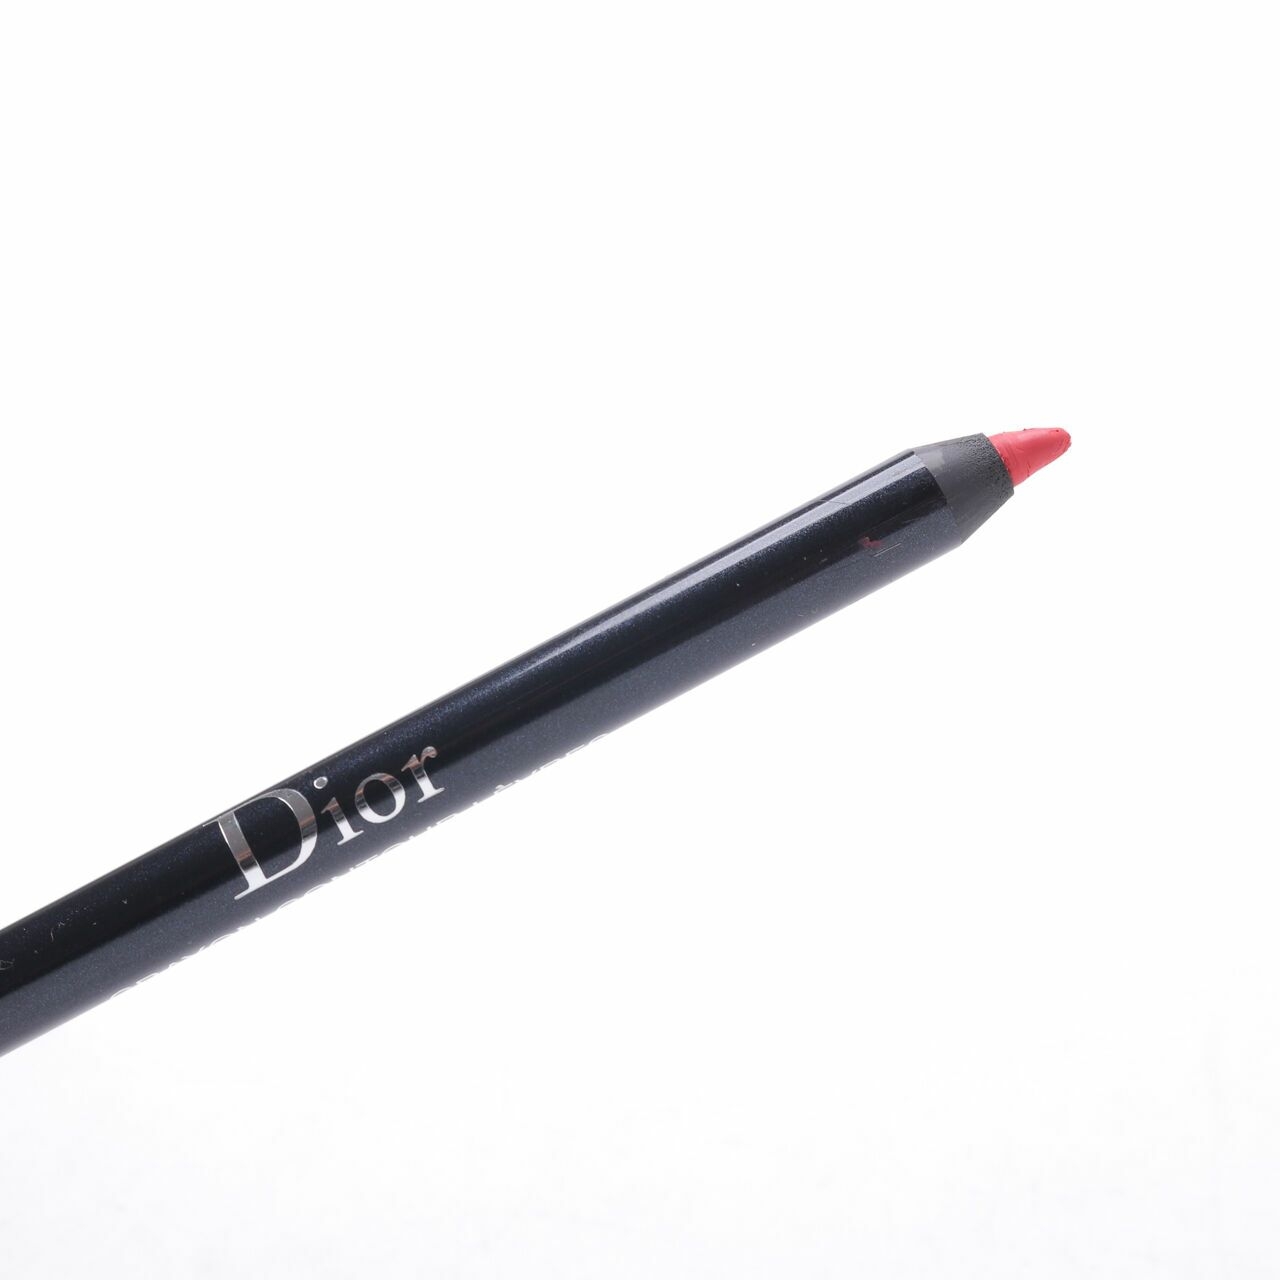 Christian Dior Crayon Contour Lip Liner With Brush & Sharpener - 028 Actrice Lips